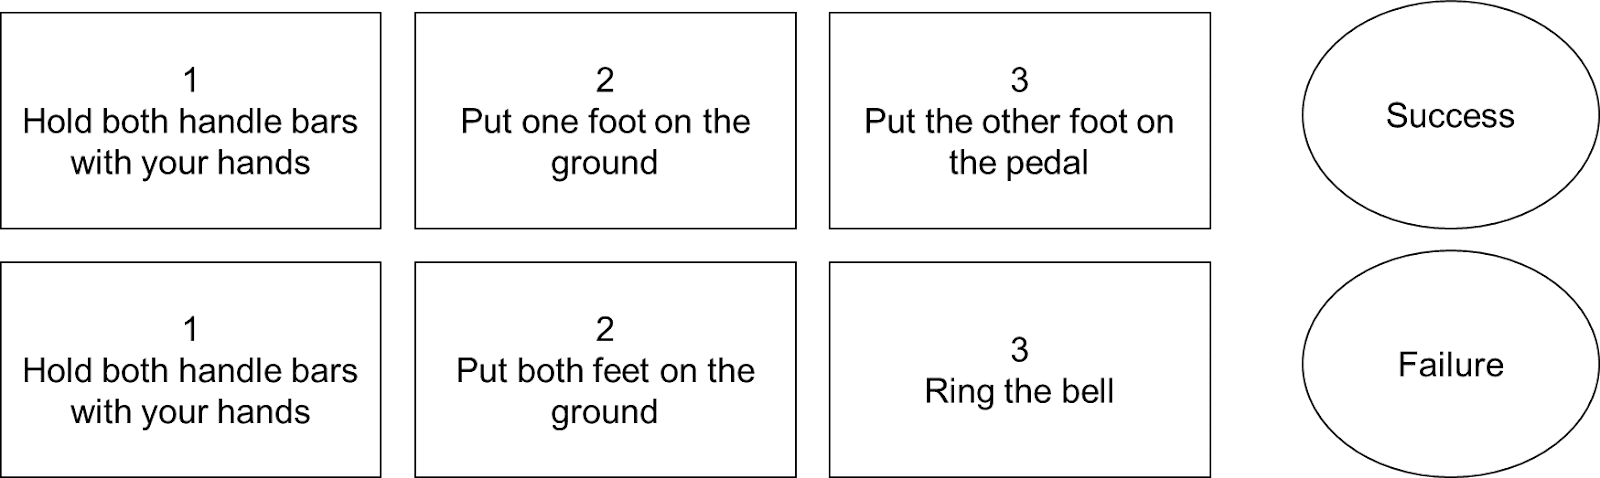 

The first row has 3 flash cards which instructions on how to ride a bicycle, and the last flashcard with a label of success or failure depending on the actions. The first row gives a success example, while the second row gives an example of a failure.